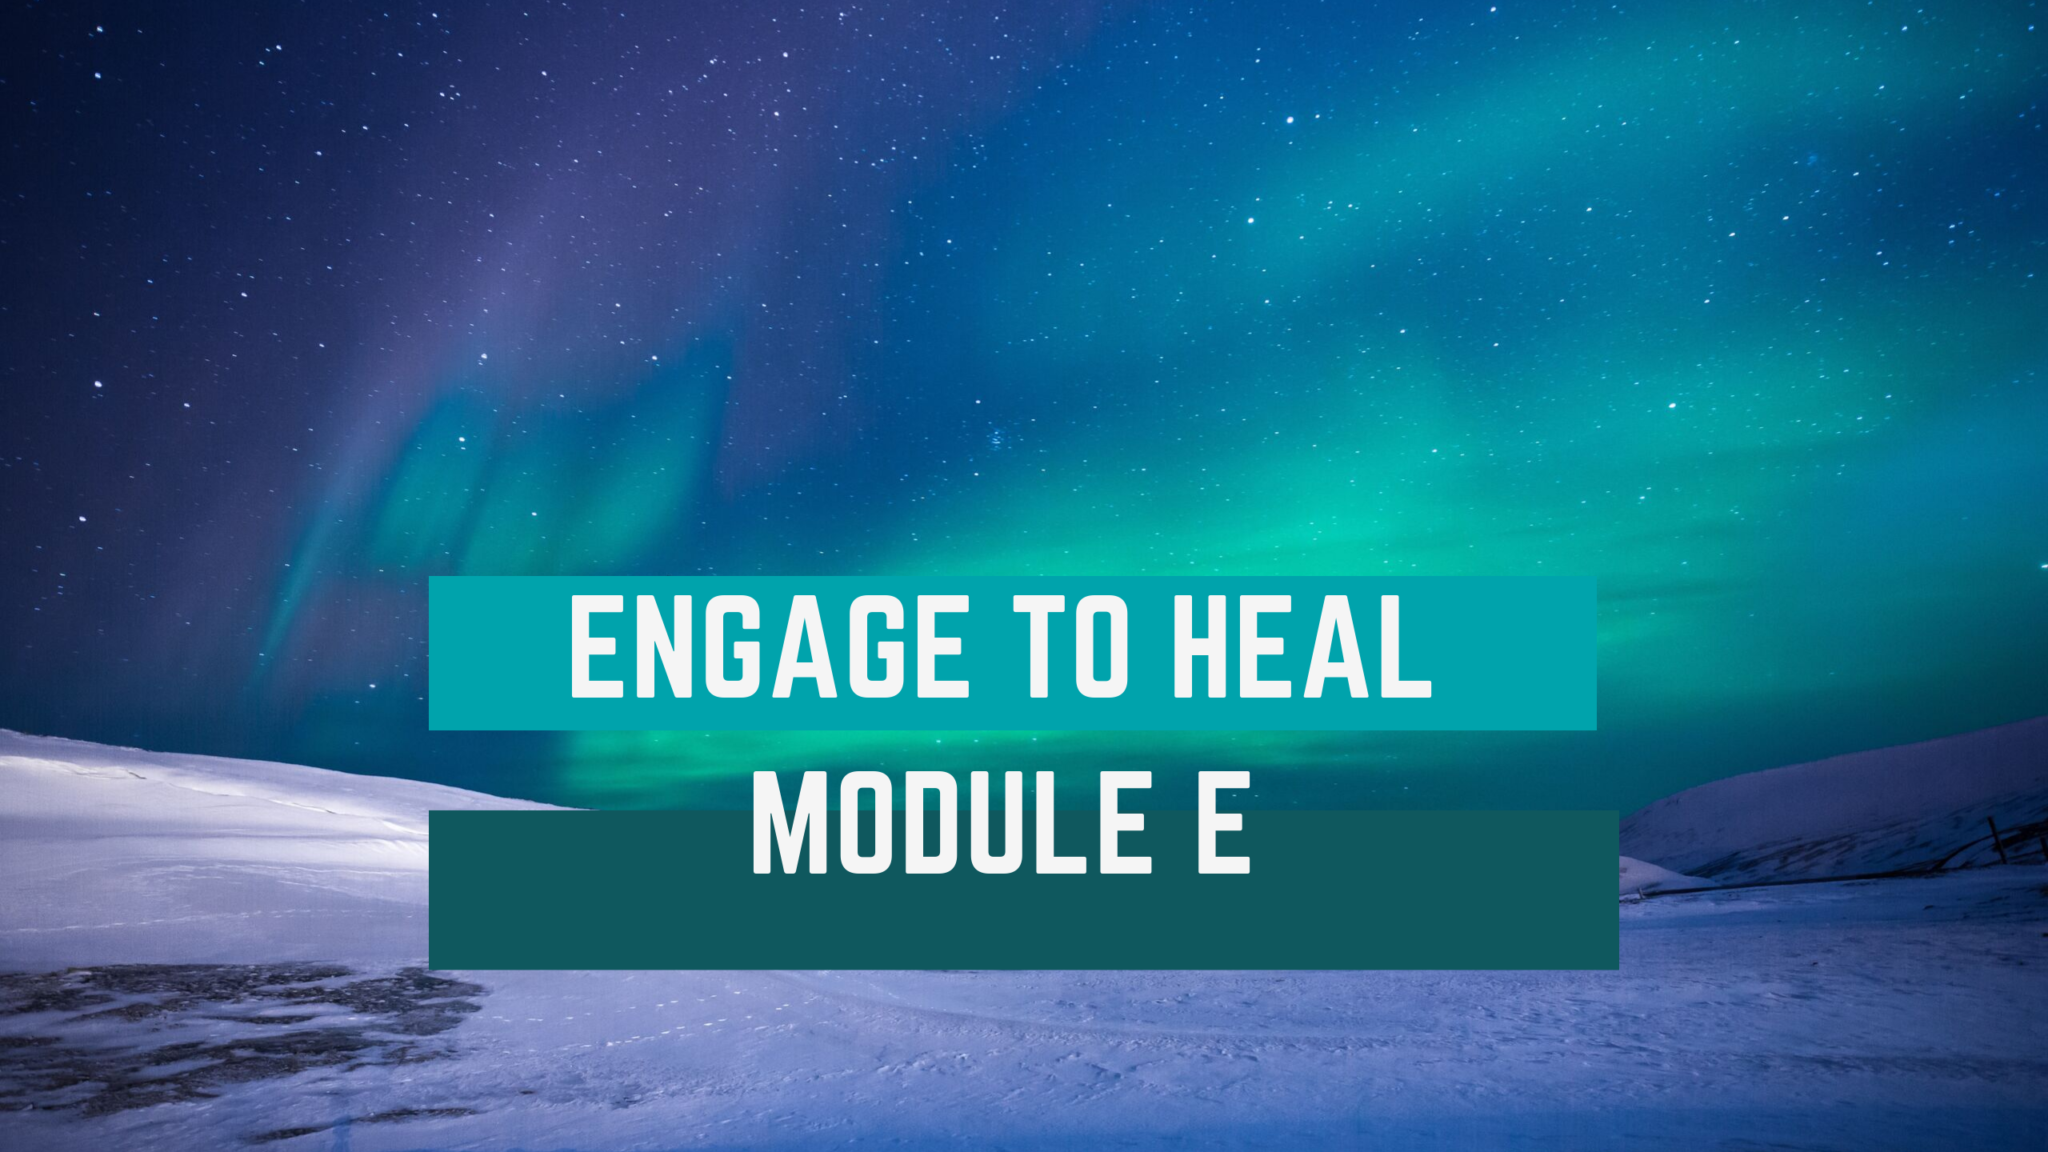 engage-to-heal-1-2048x1152